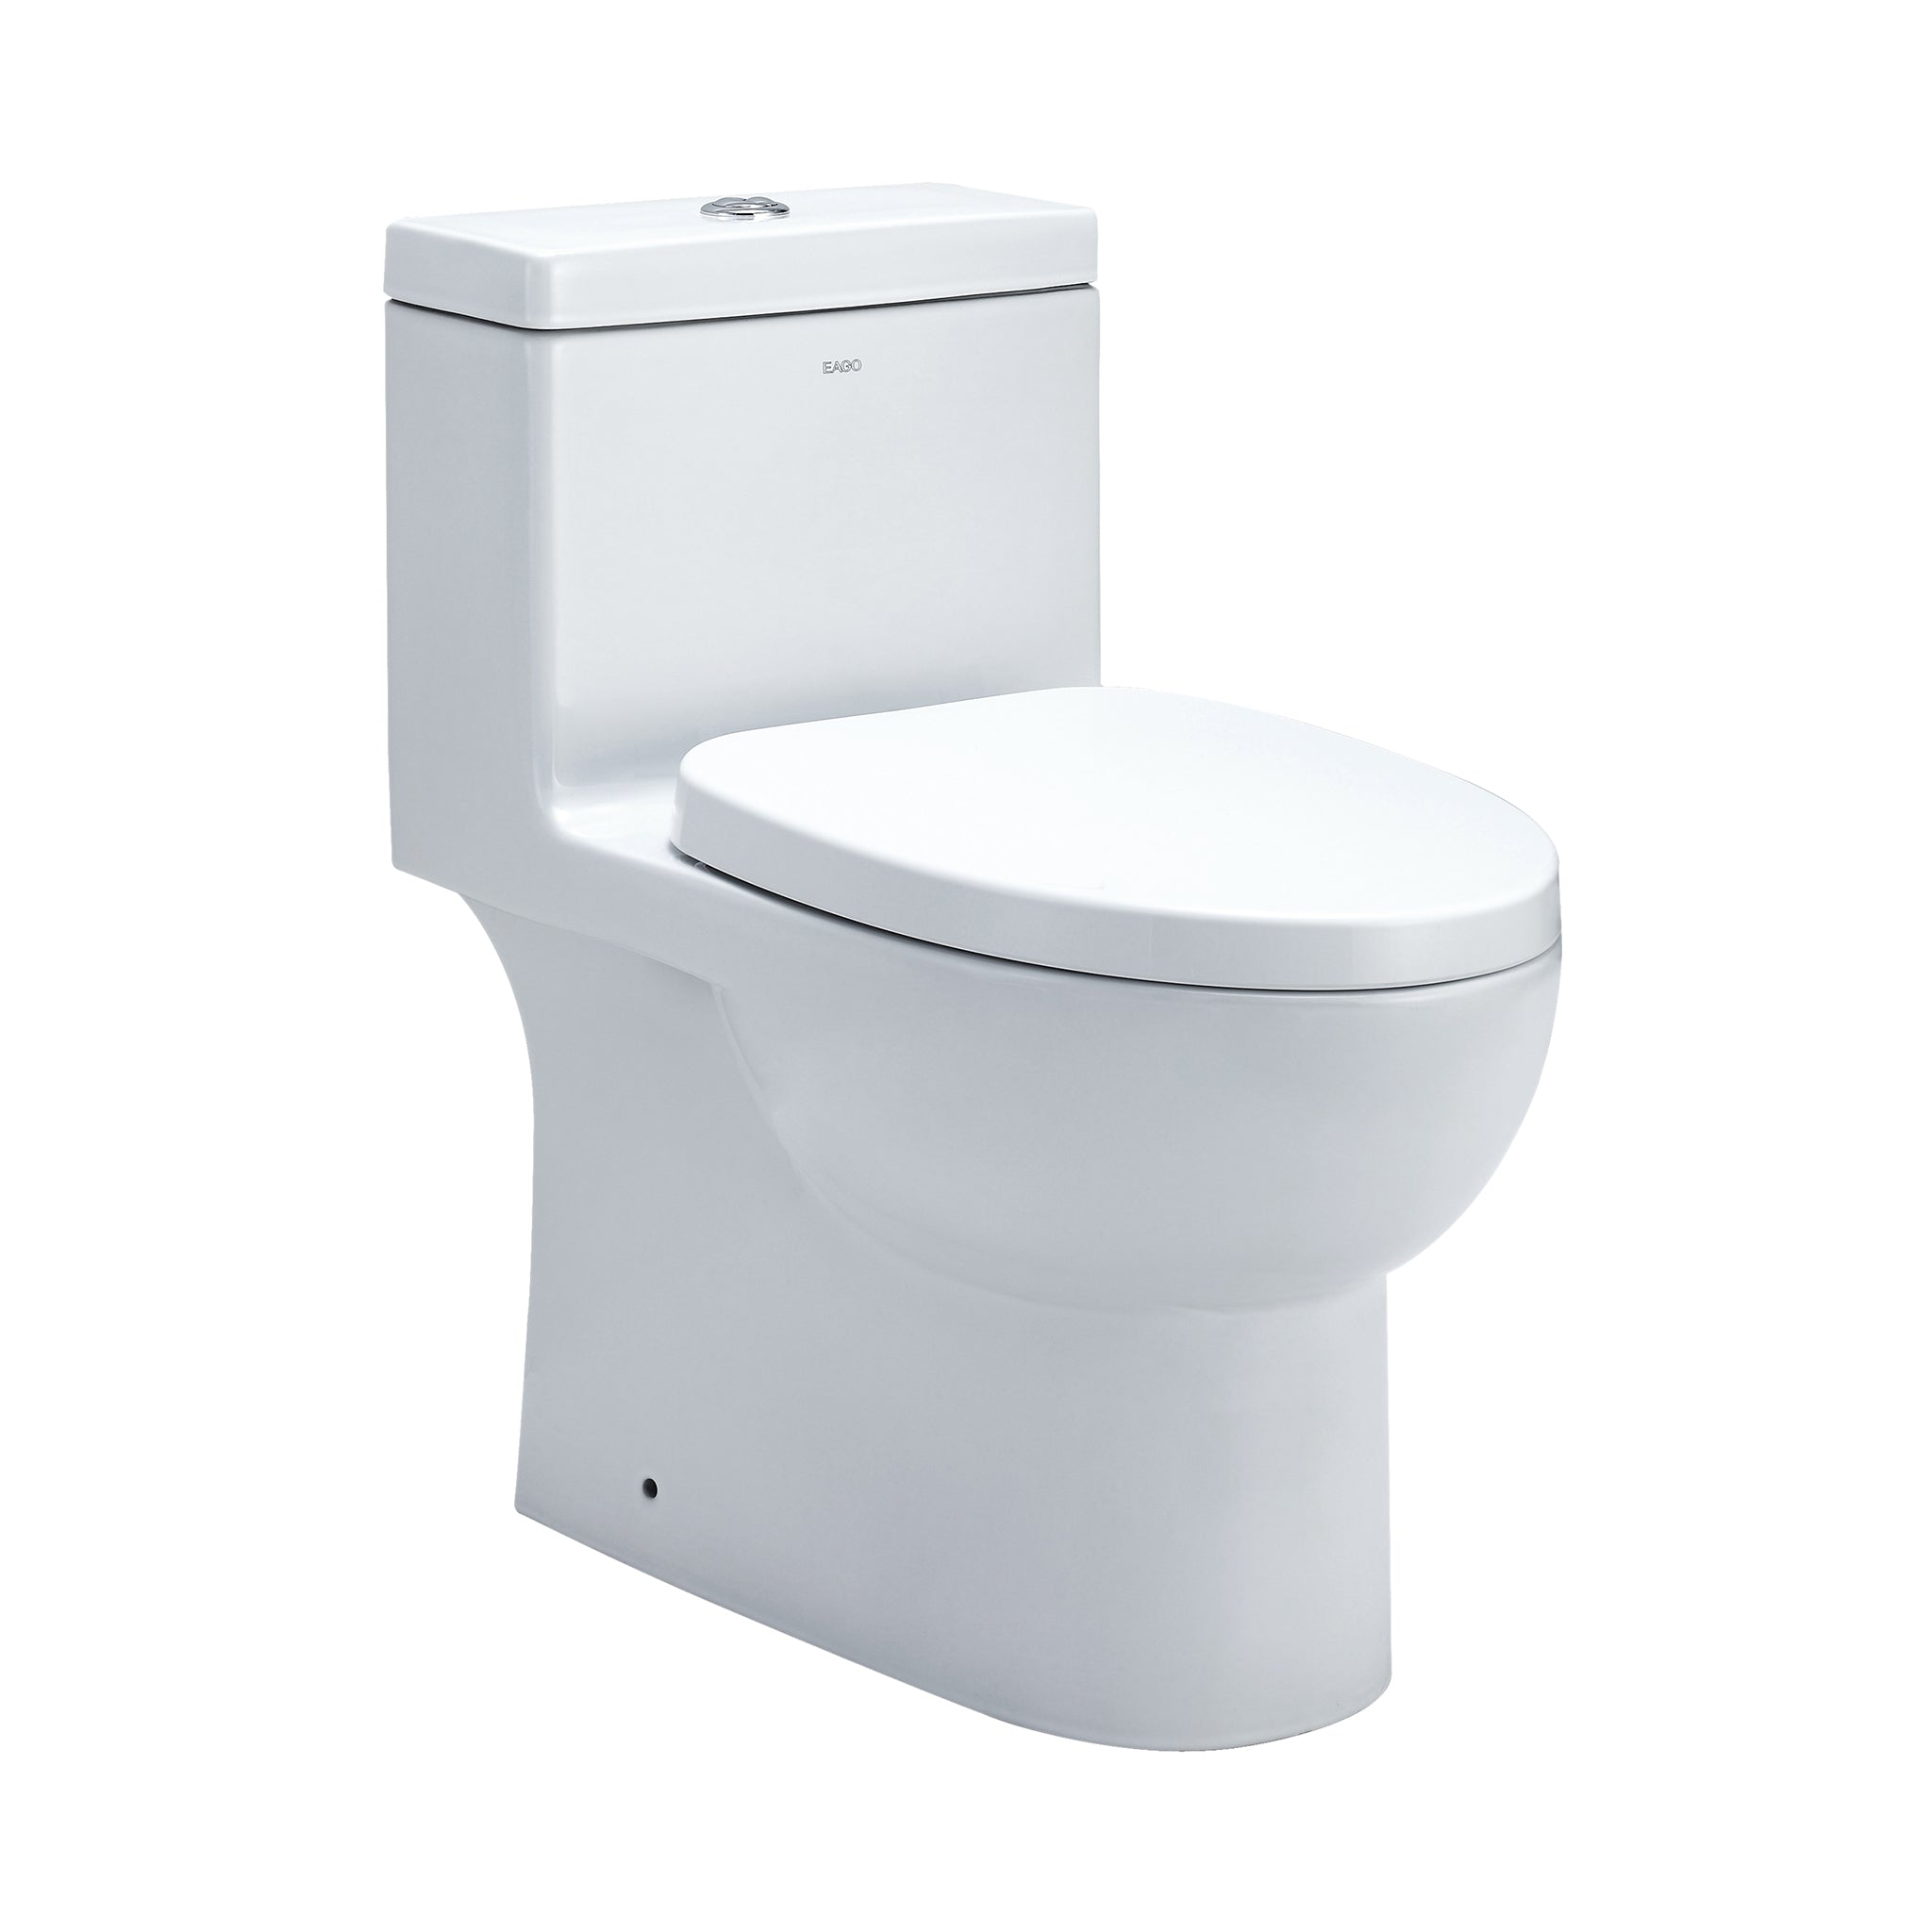 Eago TB 359 Elongated One Piece Dual Flush Toilet With Soft Closing Seat